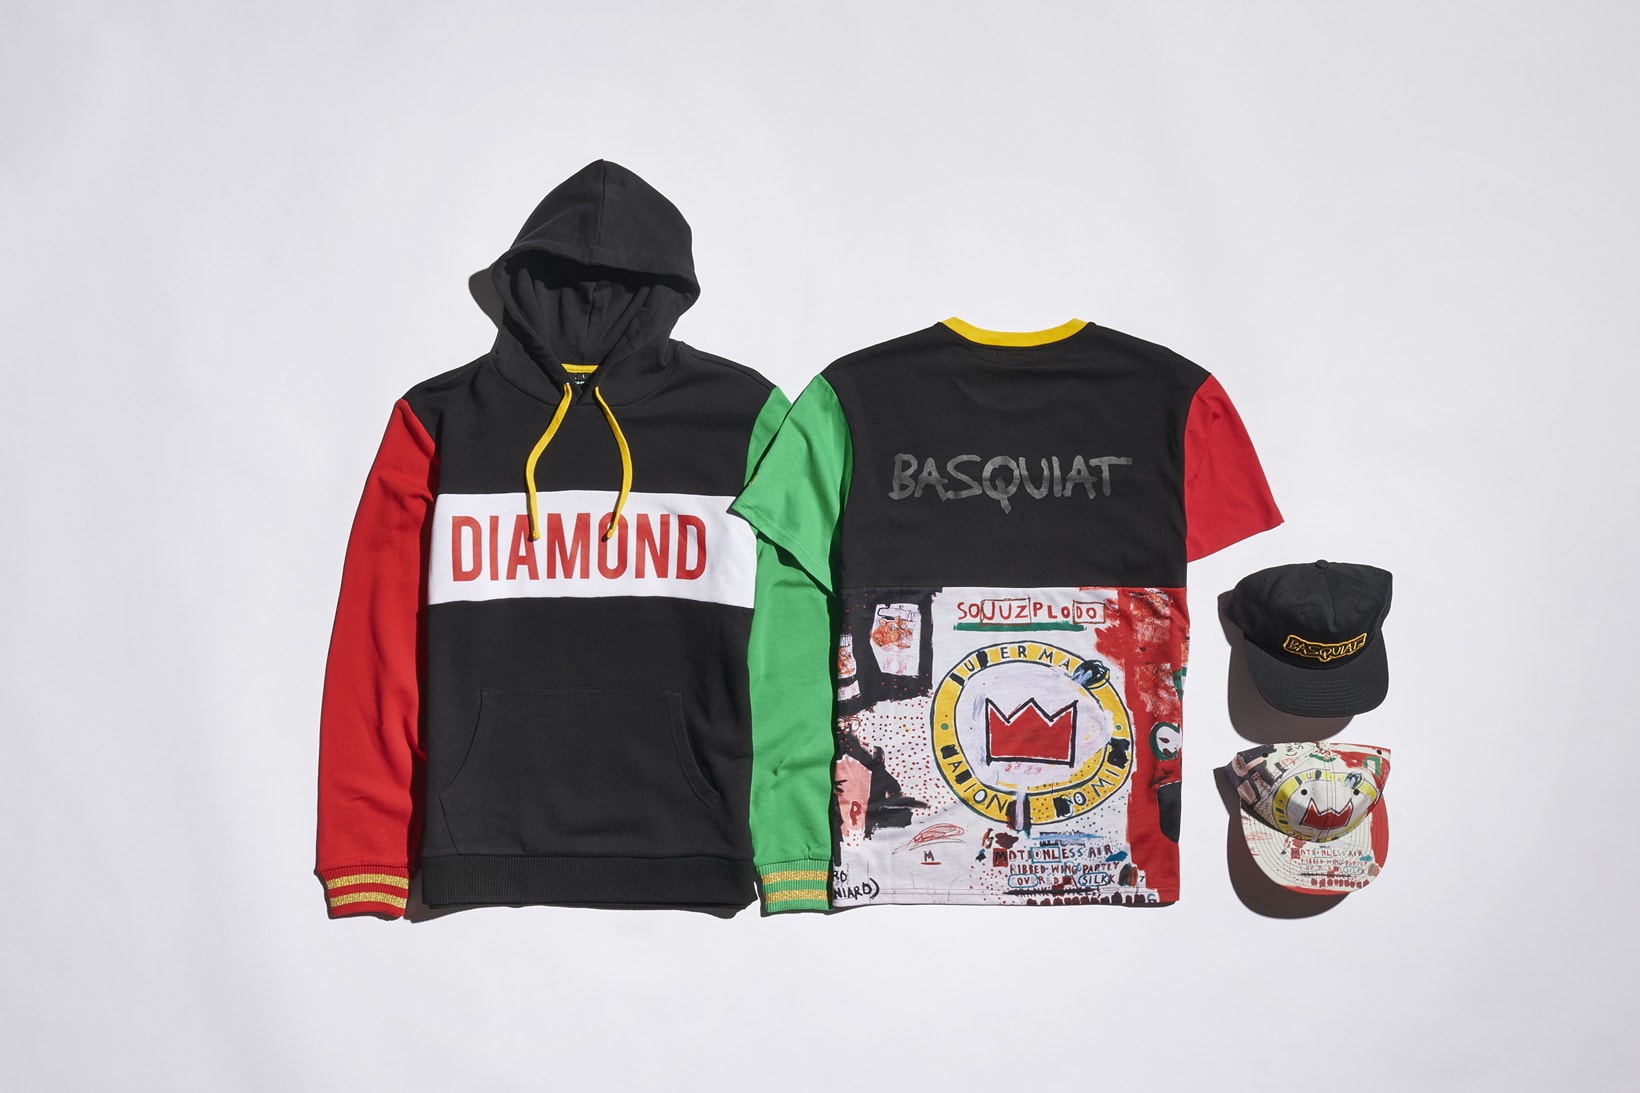 diamond supply co jean michel basquiat collection clothing apparel style streetwear fashion